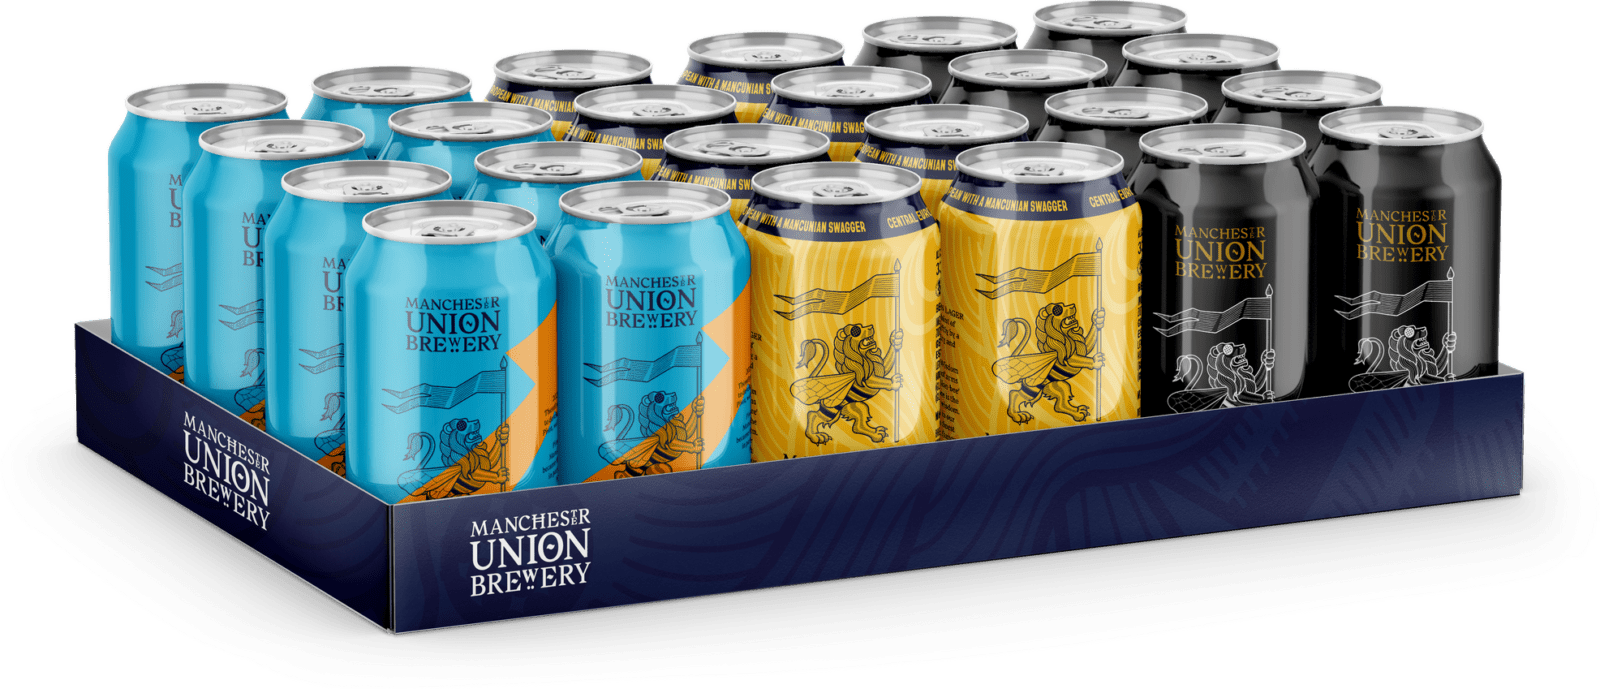 Manchester Union Brewery launches two new brews to support the city&#8217;s music venues, The Manc